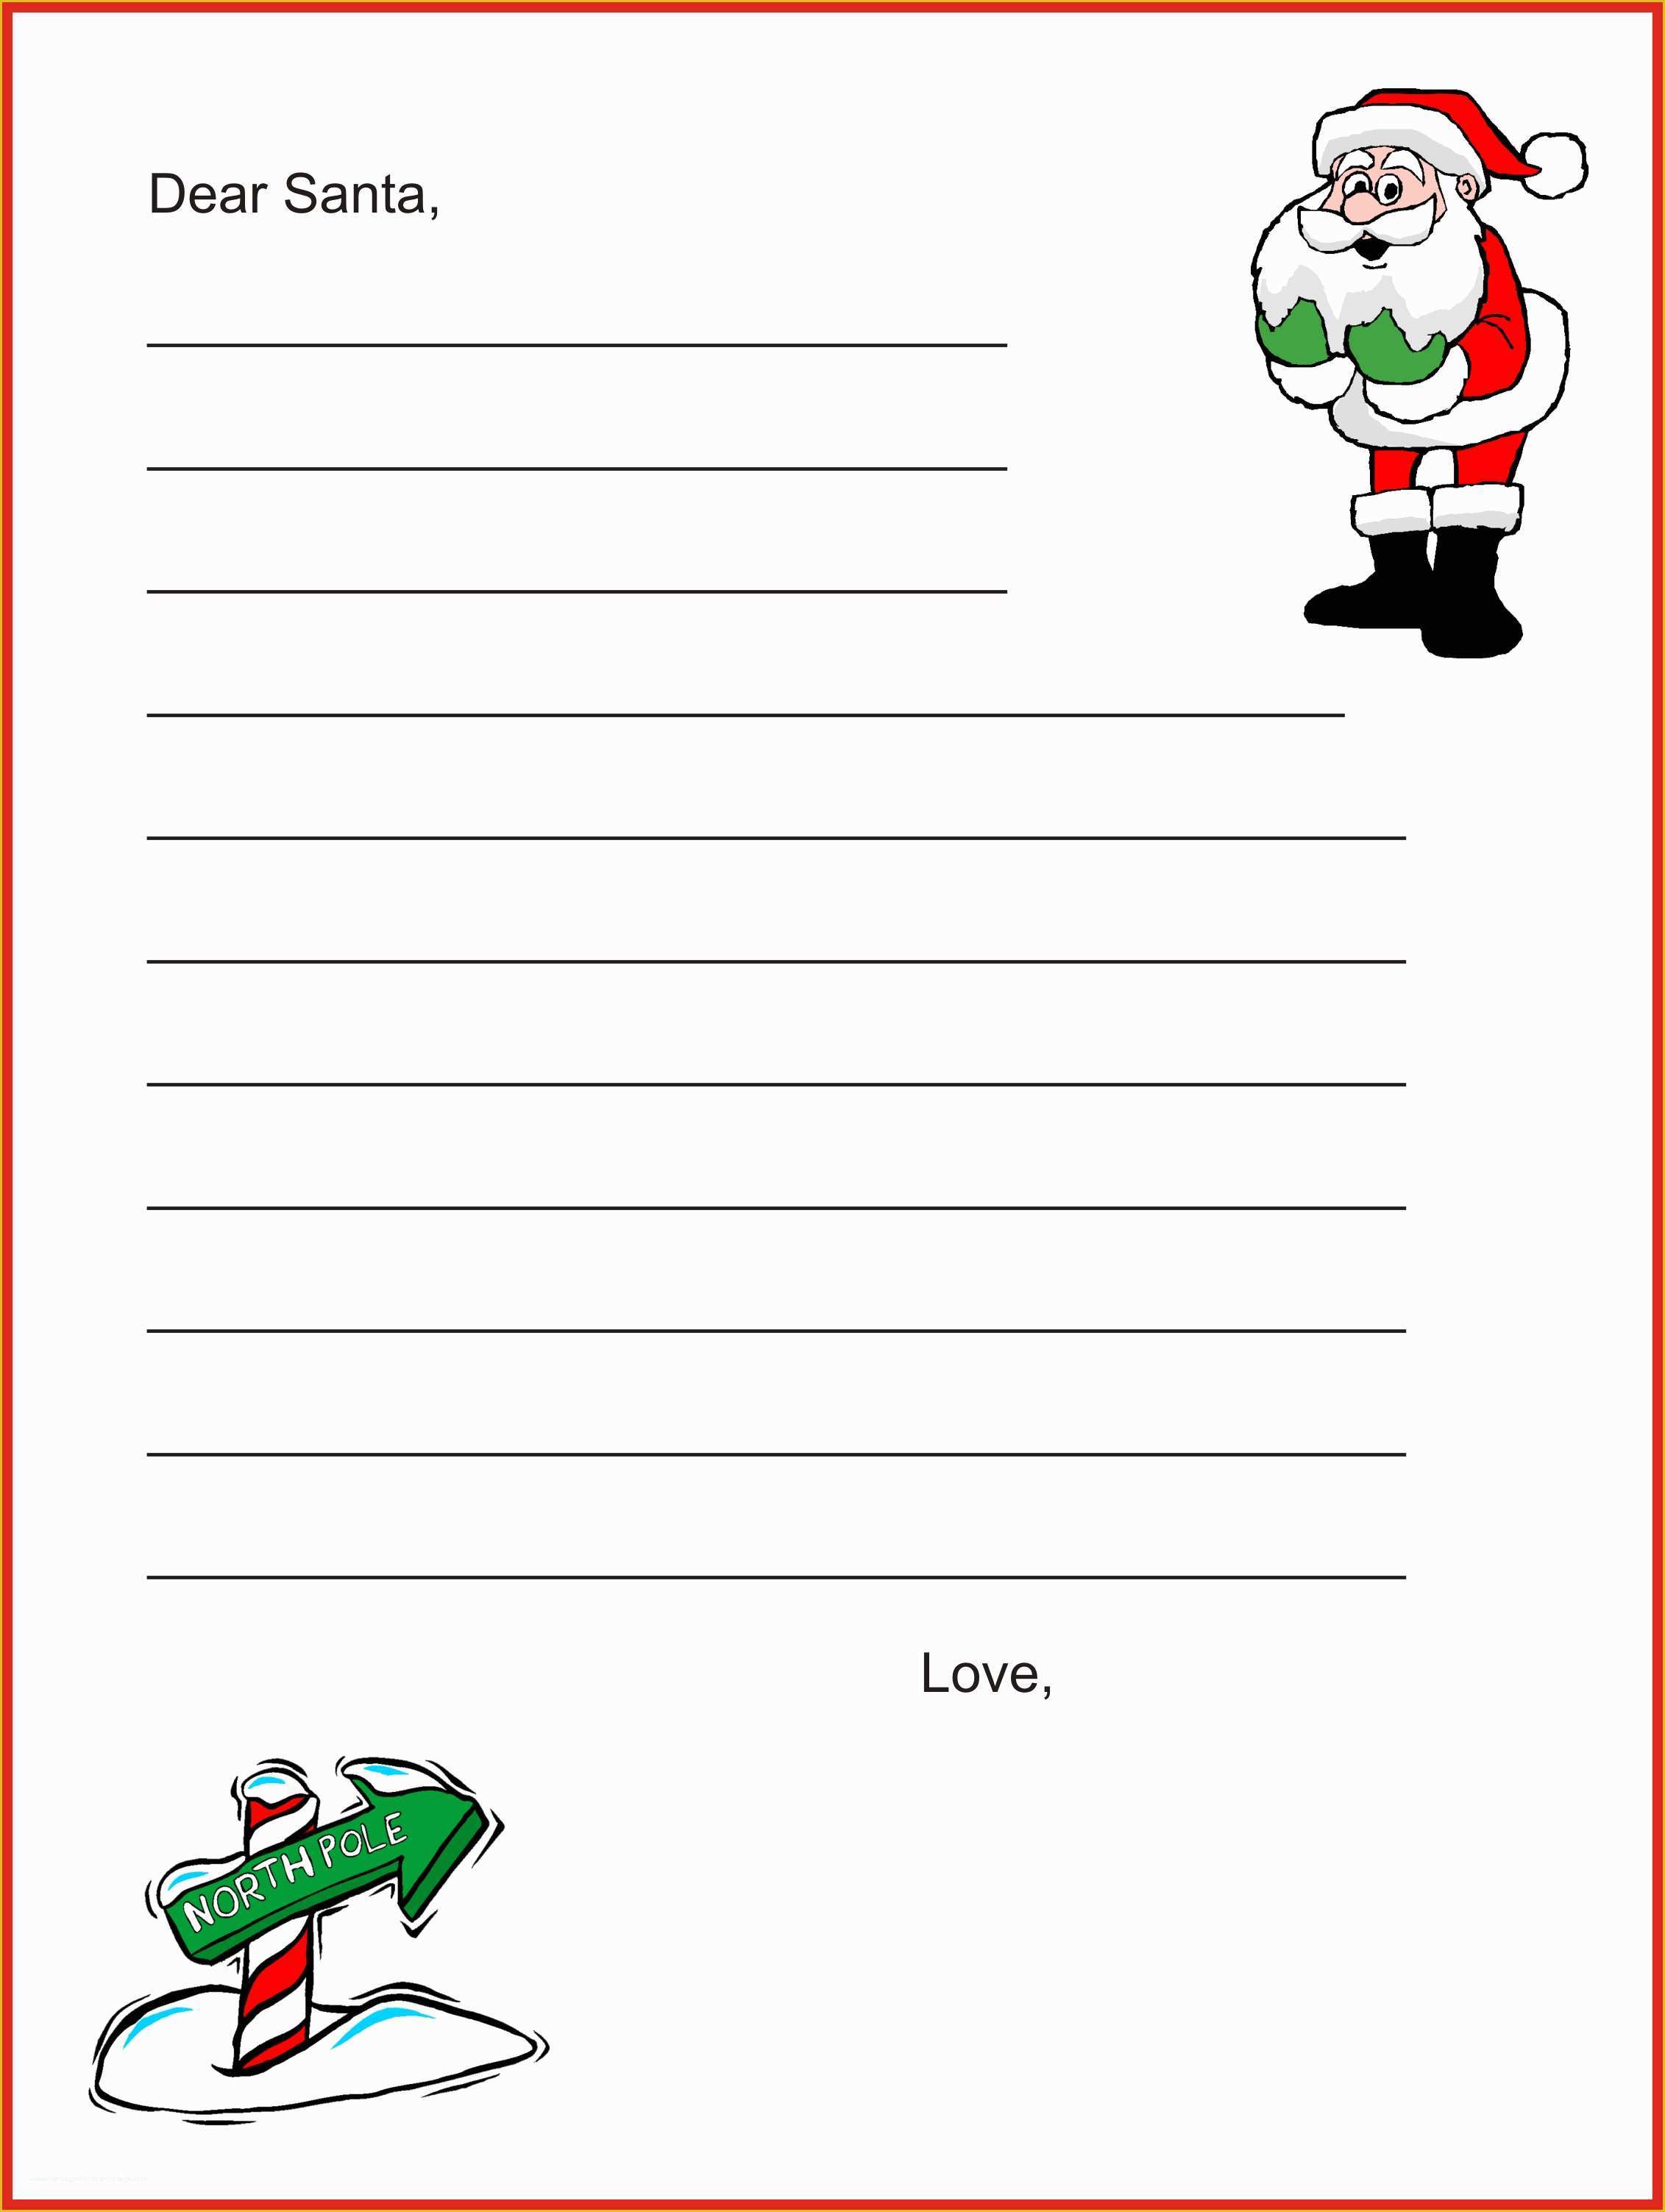 Free Printable Letter From Santa Template Of Dear Santa Letter Template Christmas Letter Tips